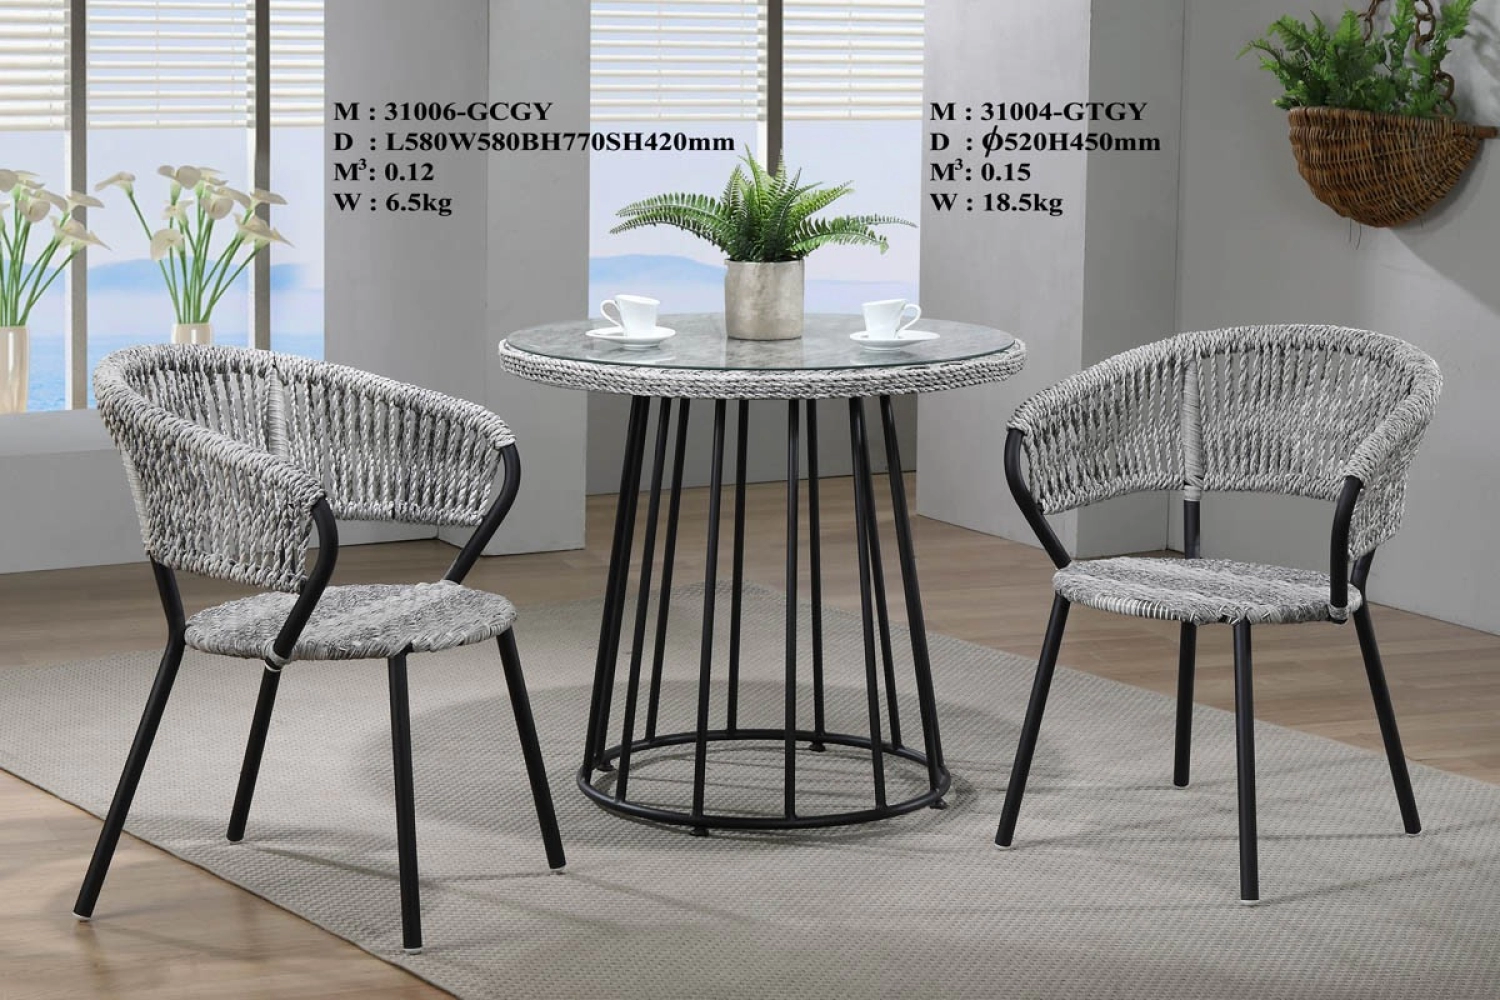 SL-G31004TABLE/31006CHAIR Garden Set Chairs and Table 